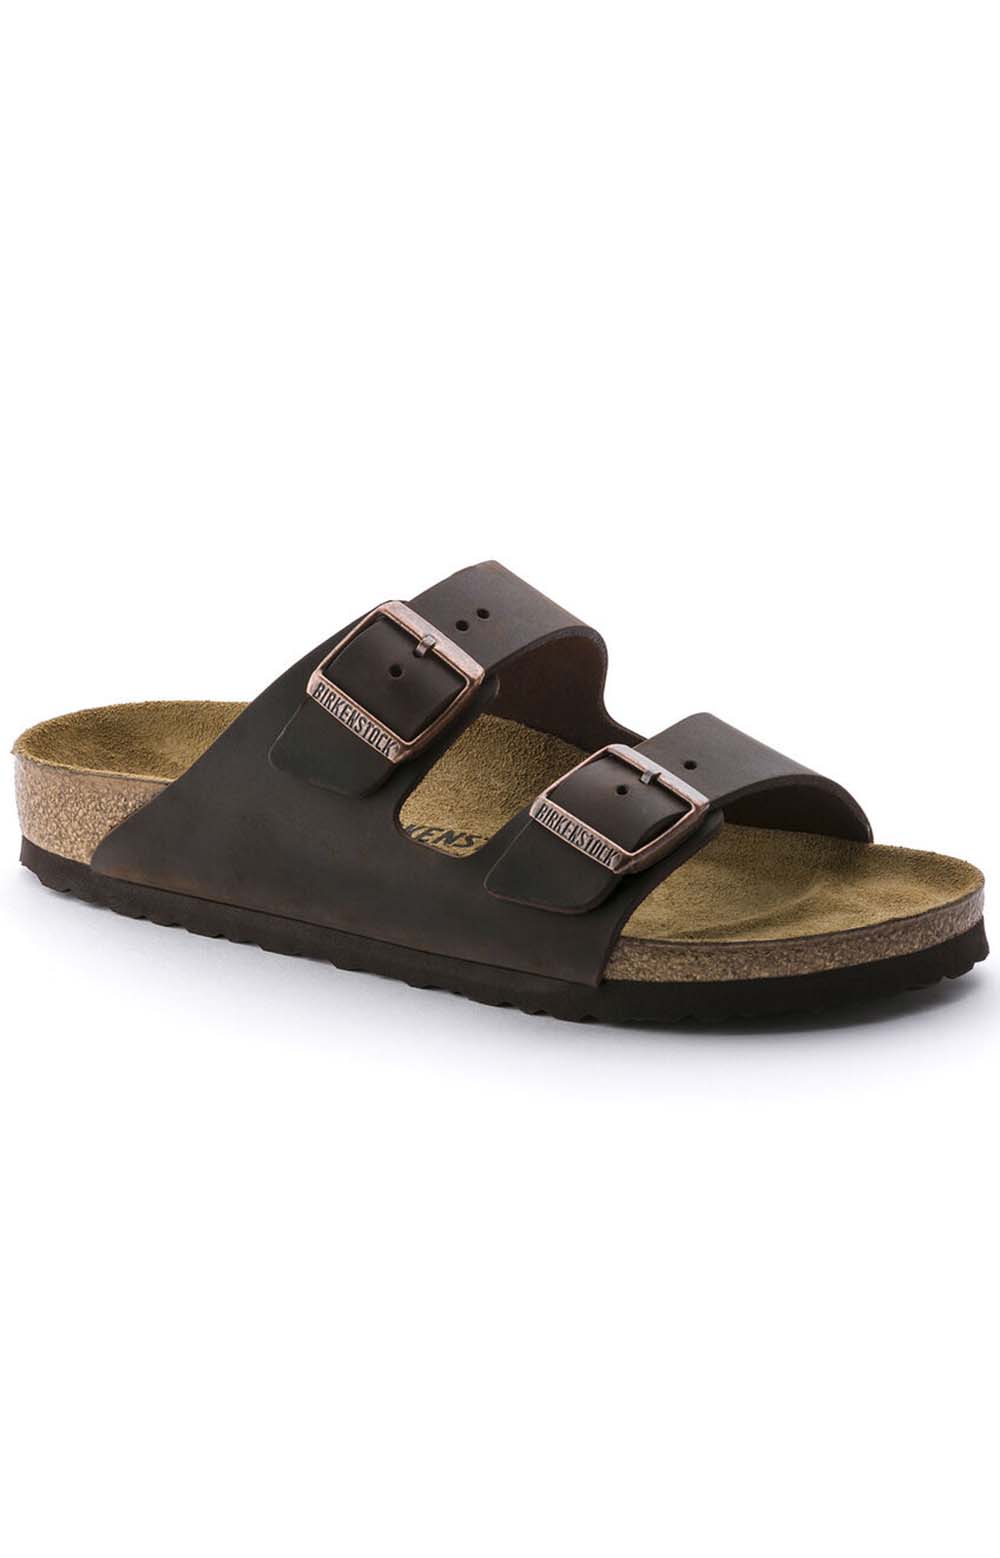 (5253) Arizona Sandals Habana in classic brown leather with adjustable straps 